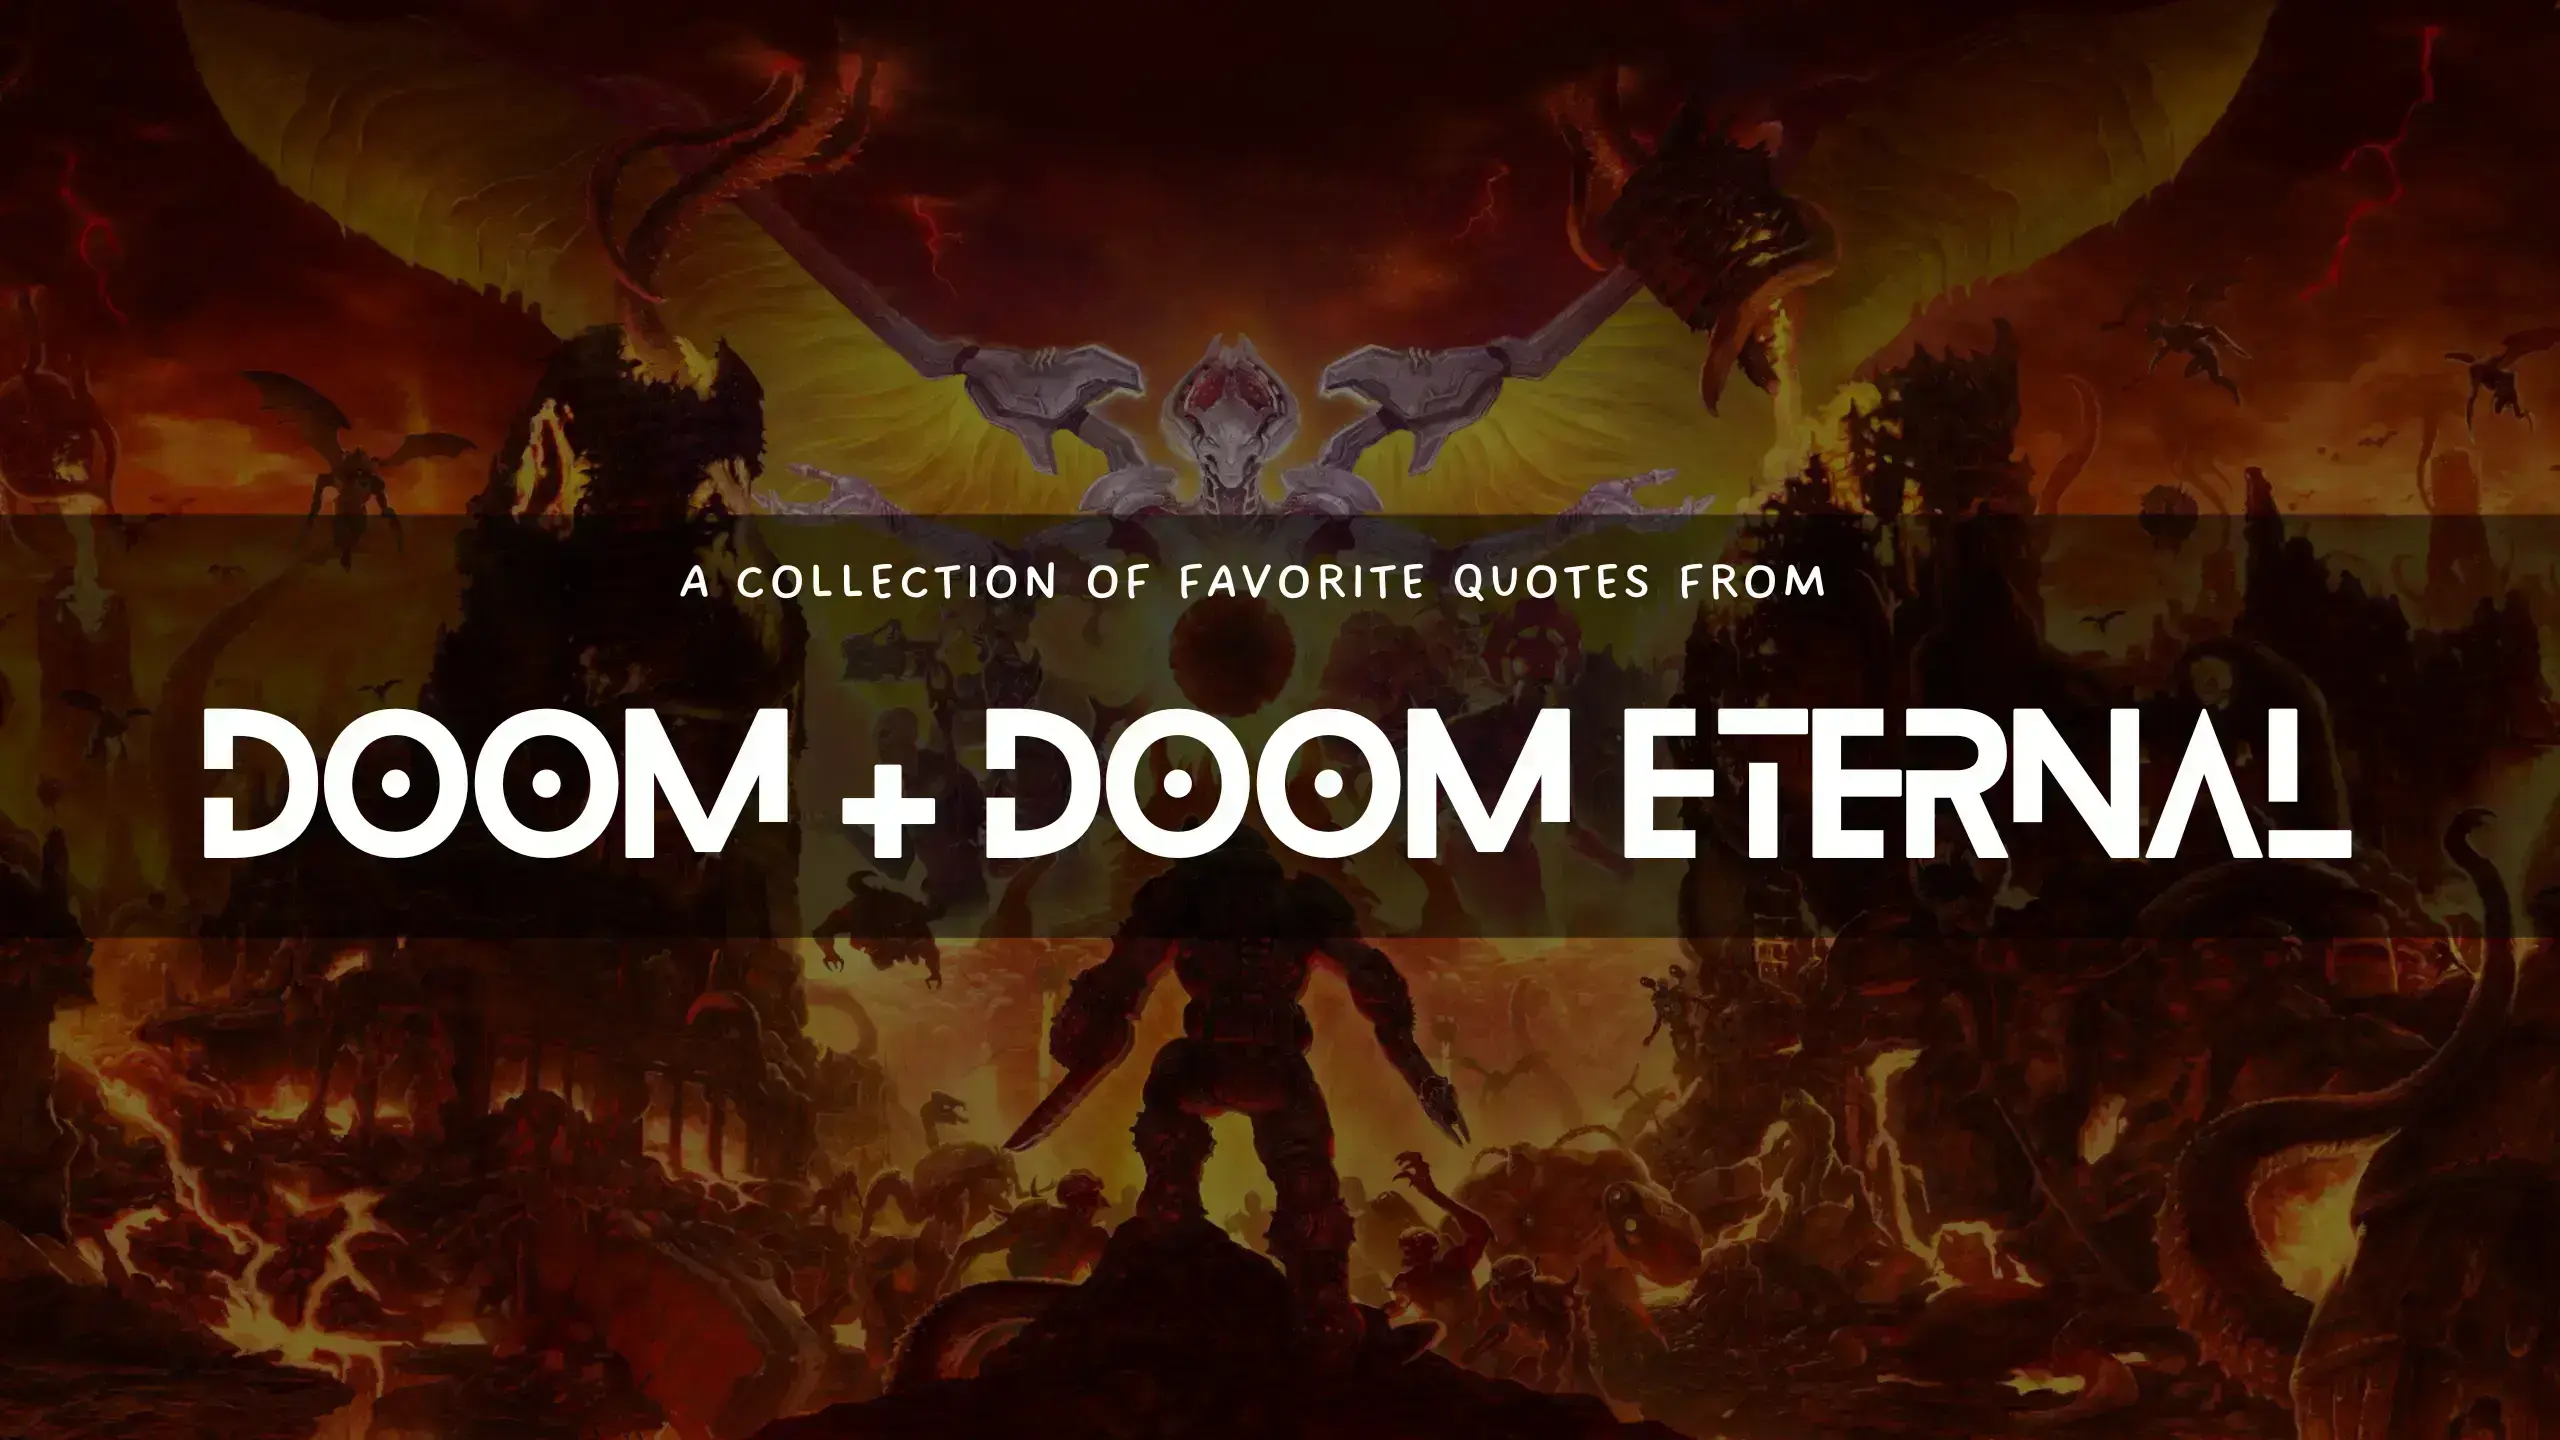 Awesome quotes from Doom (2016) and Doom Eternal